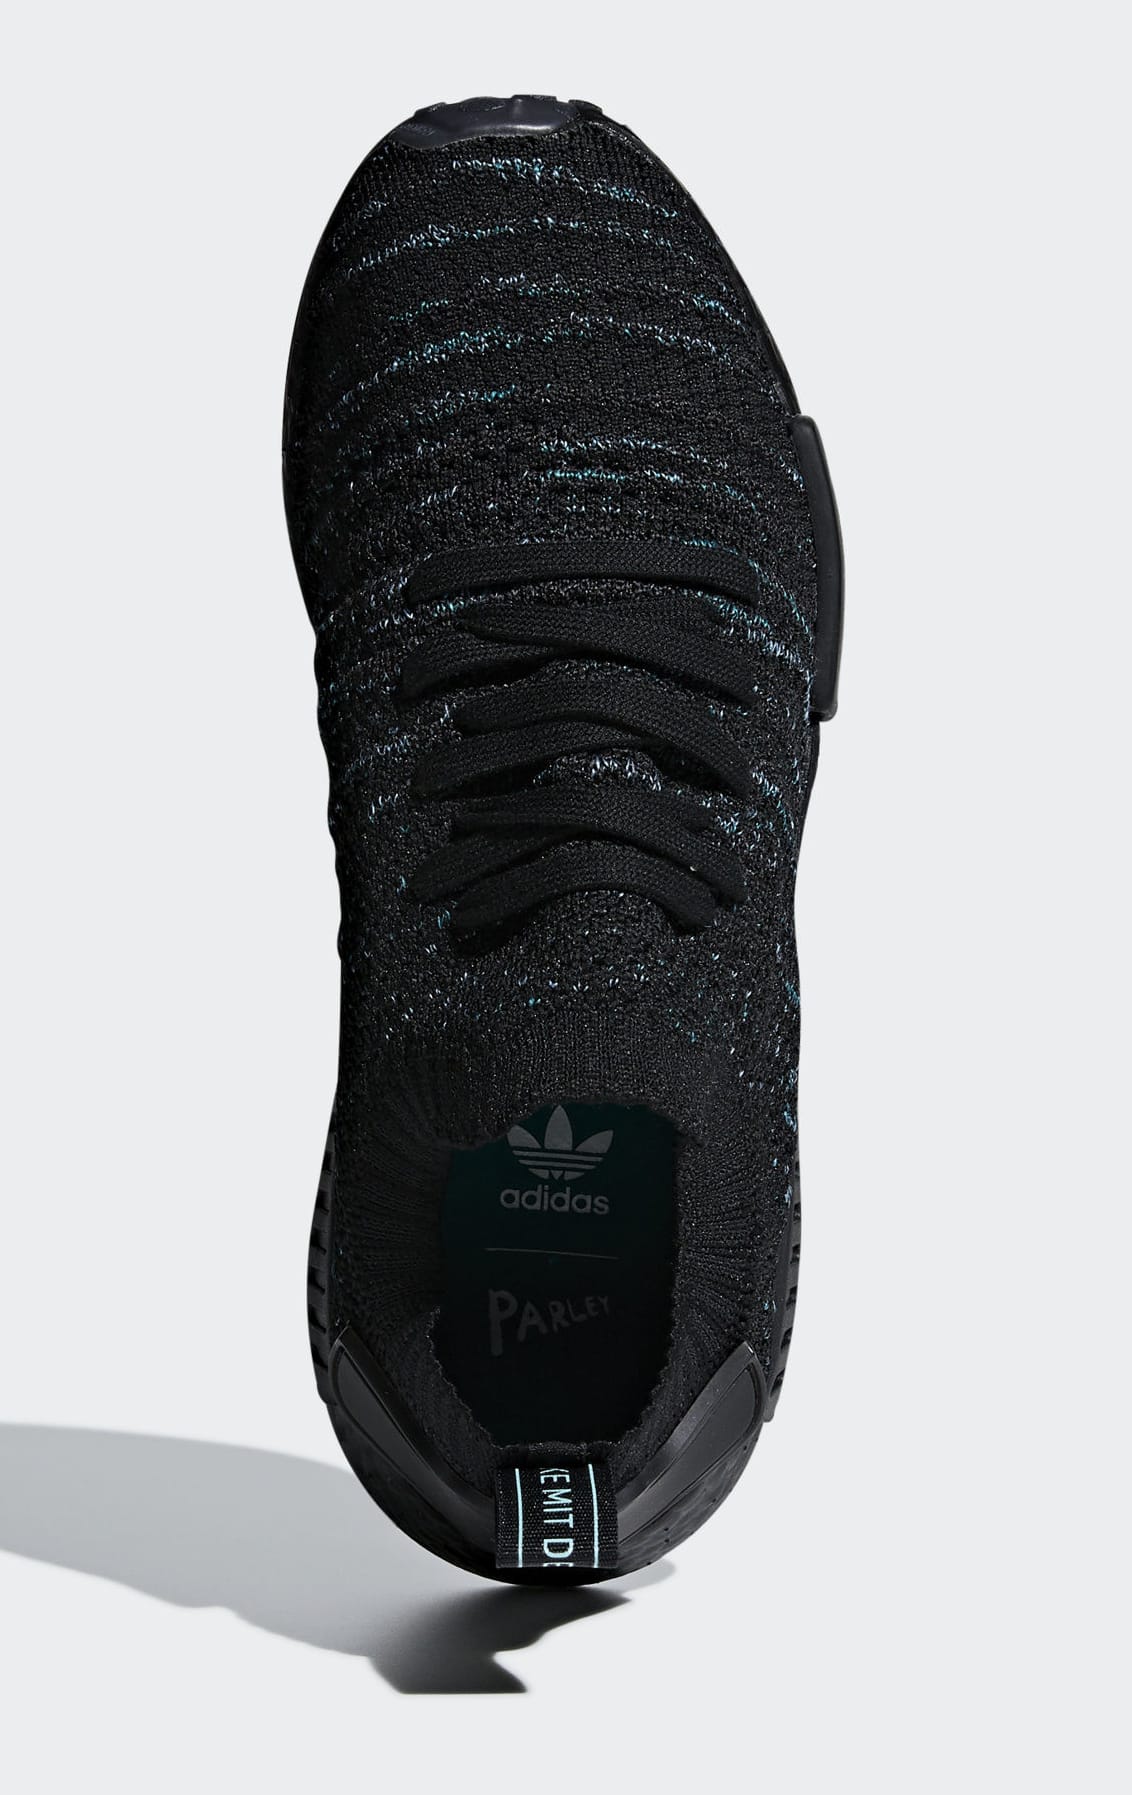 Markeret nordøst Descent This Adidas NMD_R1 Is Made With Recycled Plastic | Complex